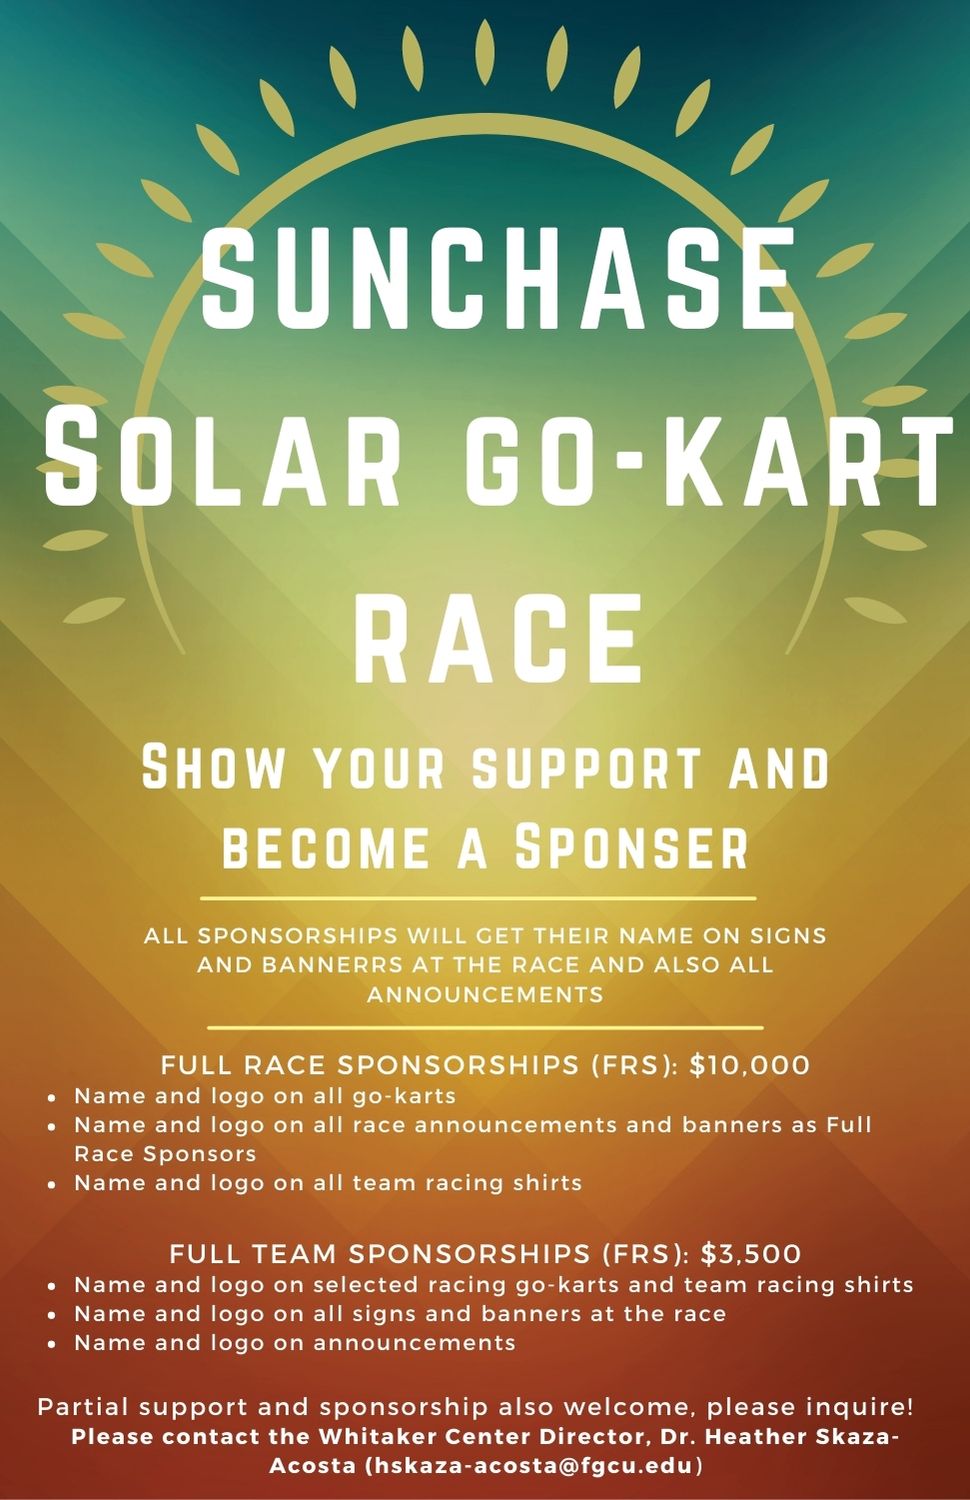 Flyer: SunChase Solar Go-Kart Race show your support and become a sponser. All sponsorships will get their name on signs and bannerrs at the race and also all announcements. Full race sponsorship (FRS) for $10,000 includes name and logo on all go-karts, name and logo on all race announcements and banners as full race sponsors, name and logo on all team racing shirts. Full team sponsorships (FRS) for $3,500 includes name and logo on selected racing go-karts and team racing shirts, name and logo on all signs and banners at the race, name and logo on announcements. Partial support and sponsorship also welcome, please inquire! Please contact the Whitaker Center Director, Dr. Heather Skaza-Acosta (hskaza-acosta@fgcu.edu)